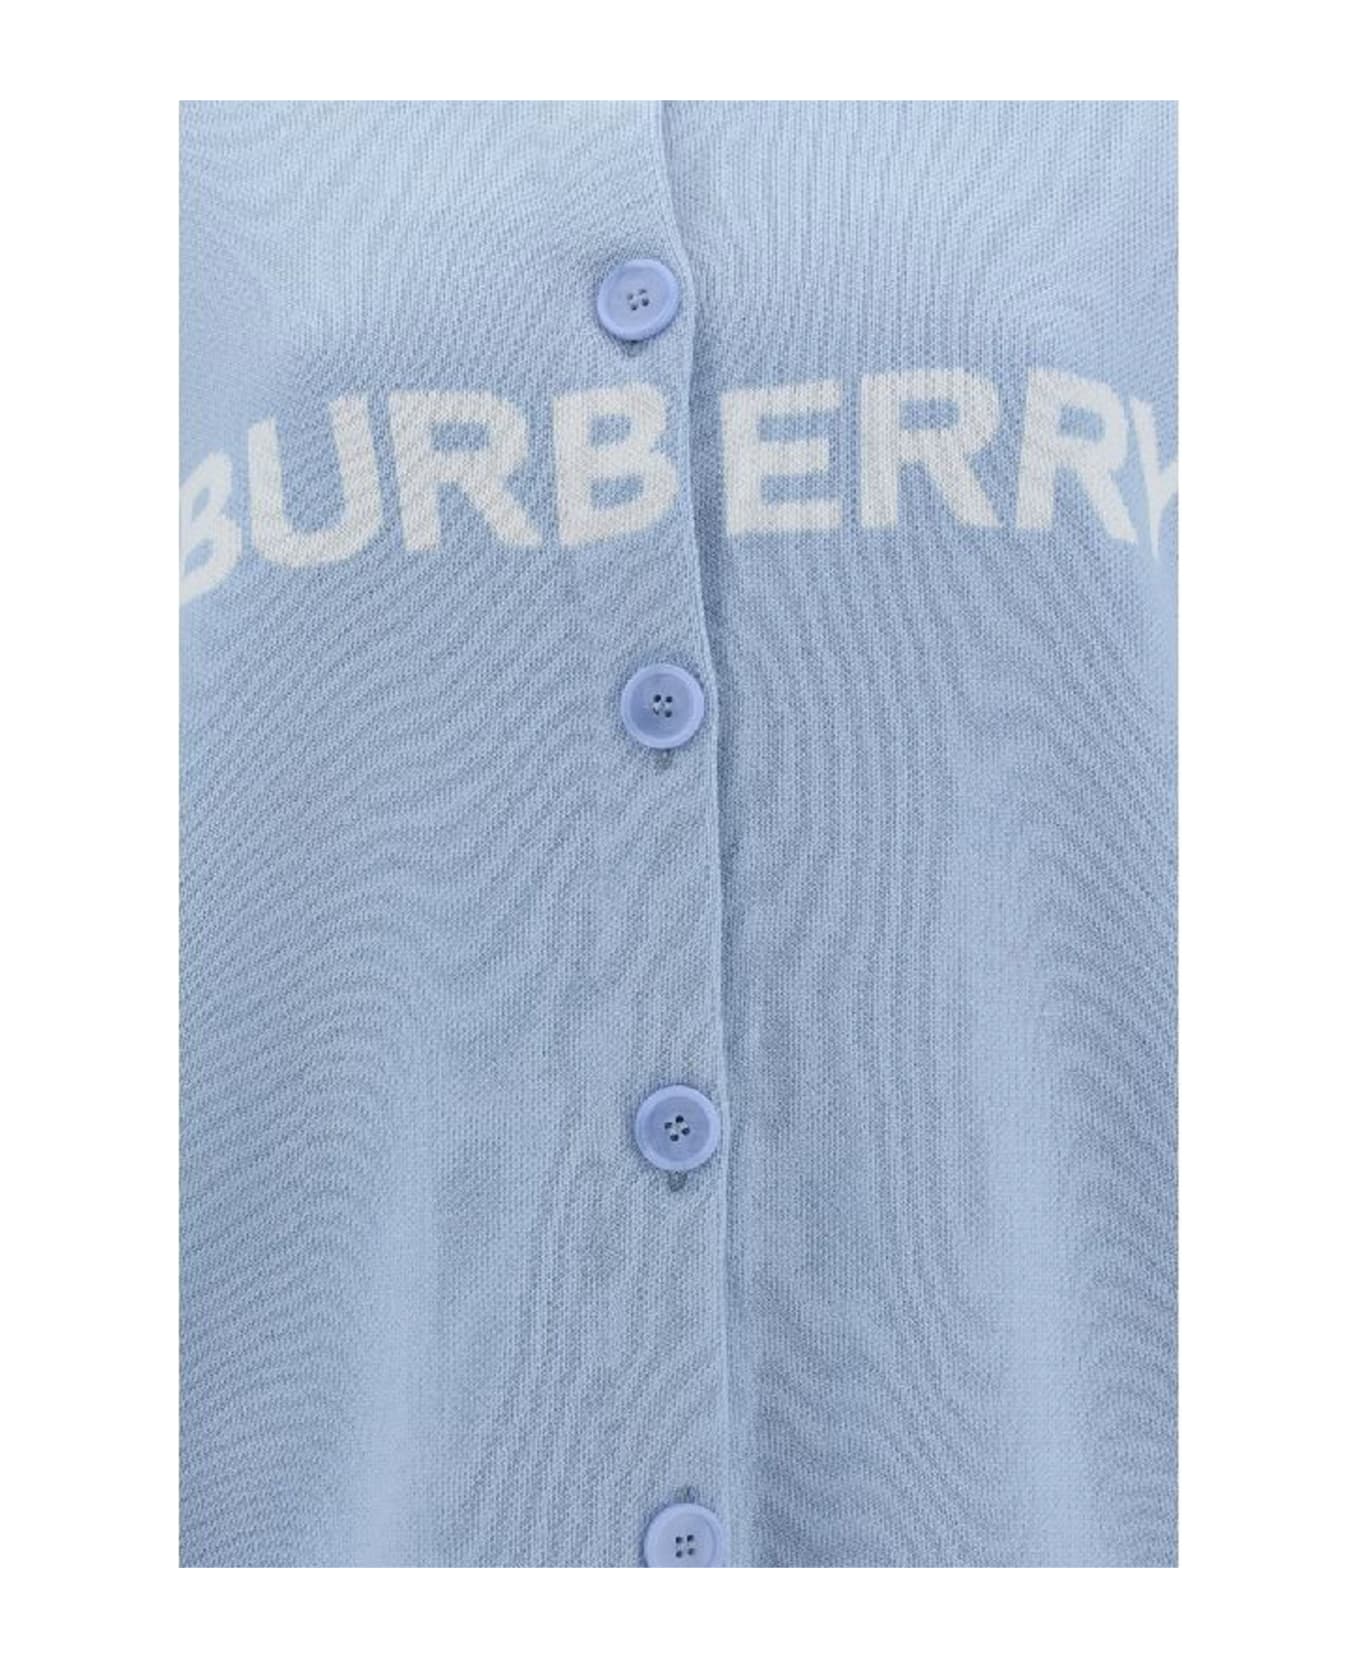 Burberry Cotton And Wool Cardigan - Blue カーディガン